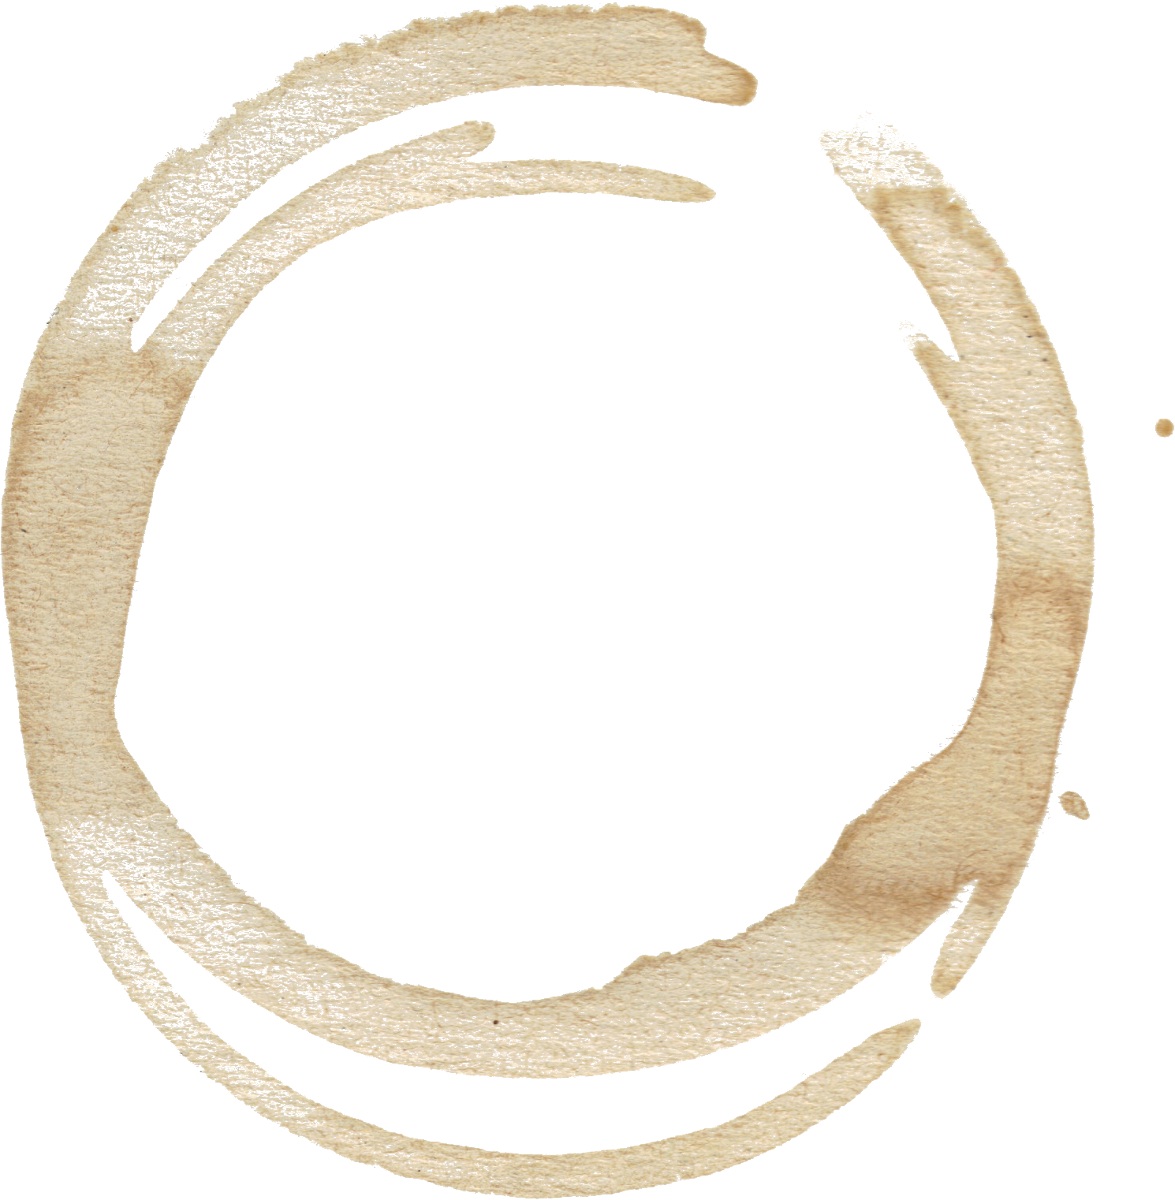 A Coffee Stain In A Circle